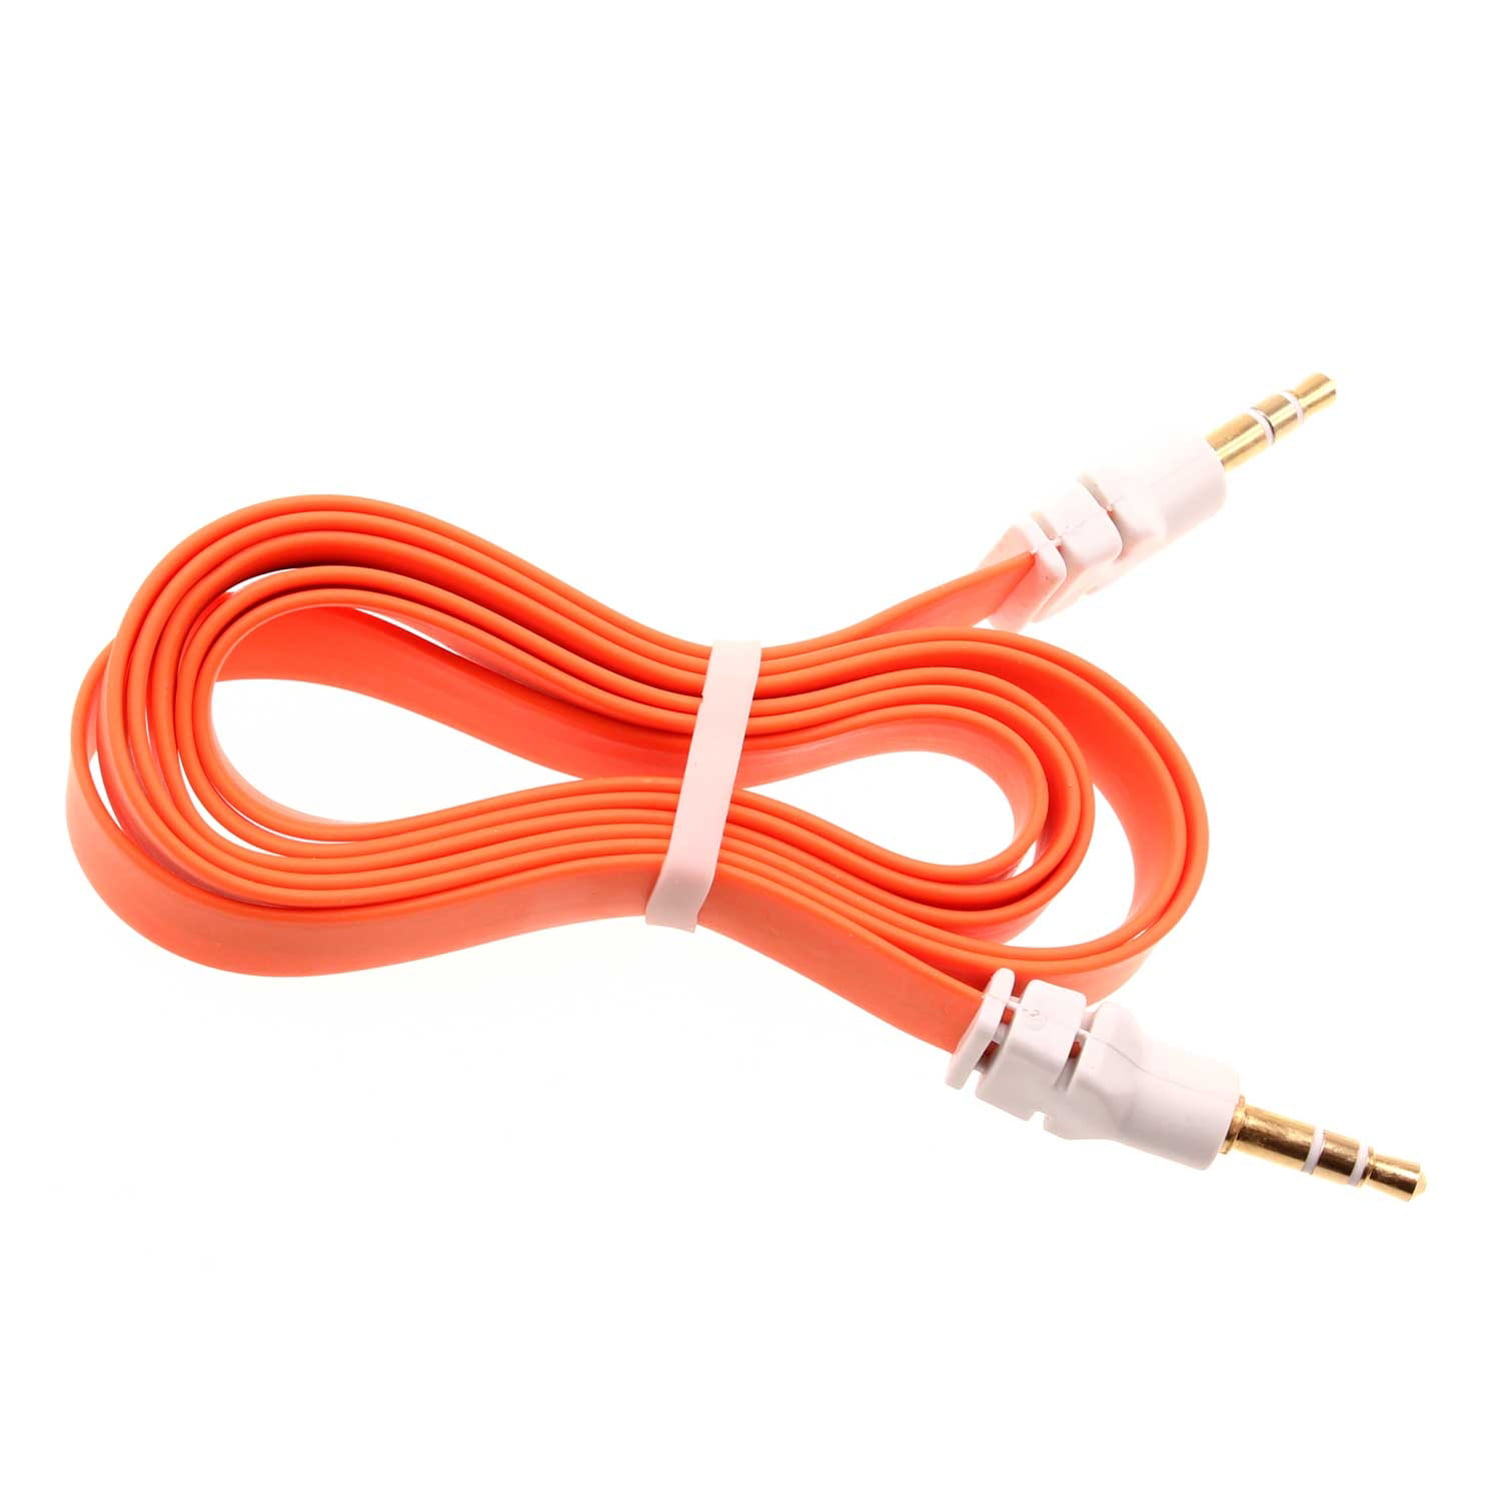 3.5mm Aux Cable Adapter Car Stereo Aux-in Audio Cord Speaker for Phones Tablets 